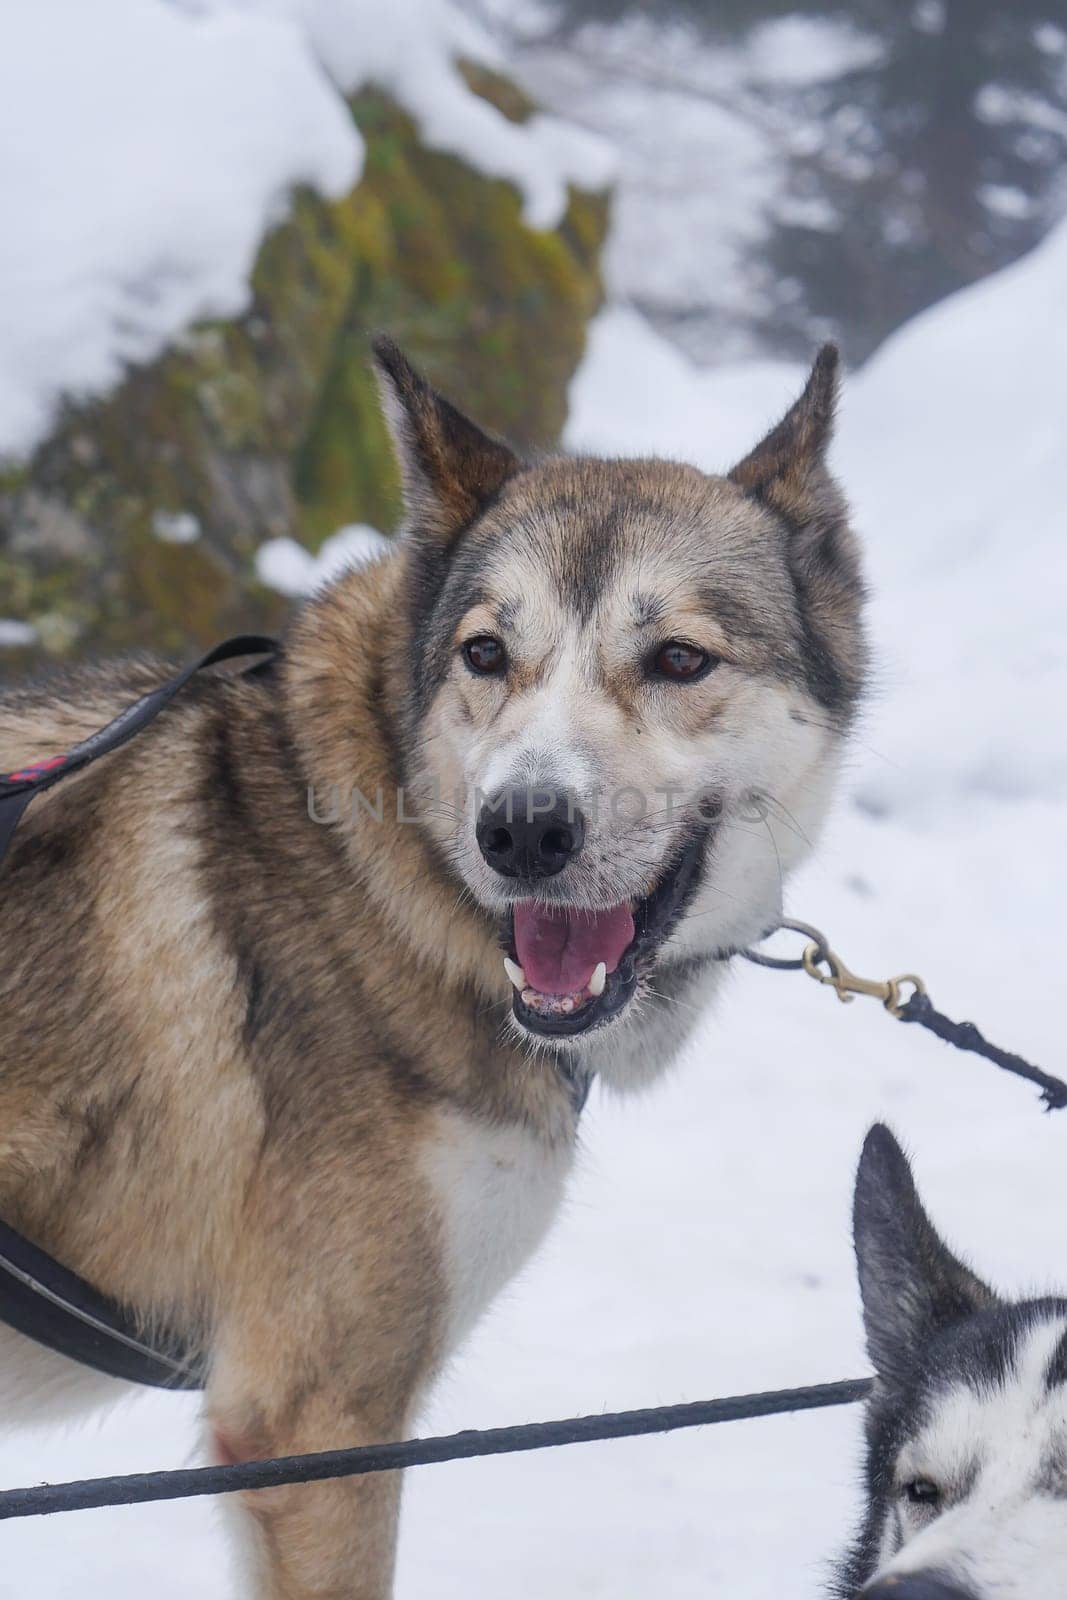 Husky dog ready for a ride, Pyrenees, France, High quality photo